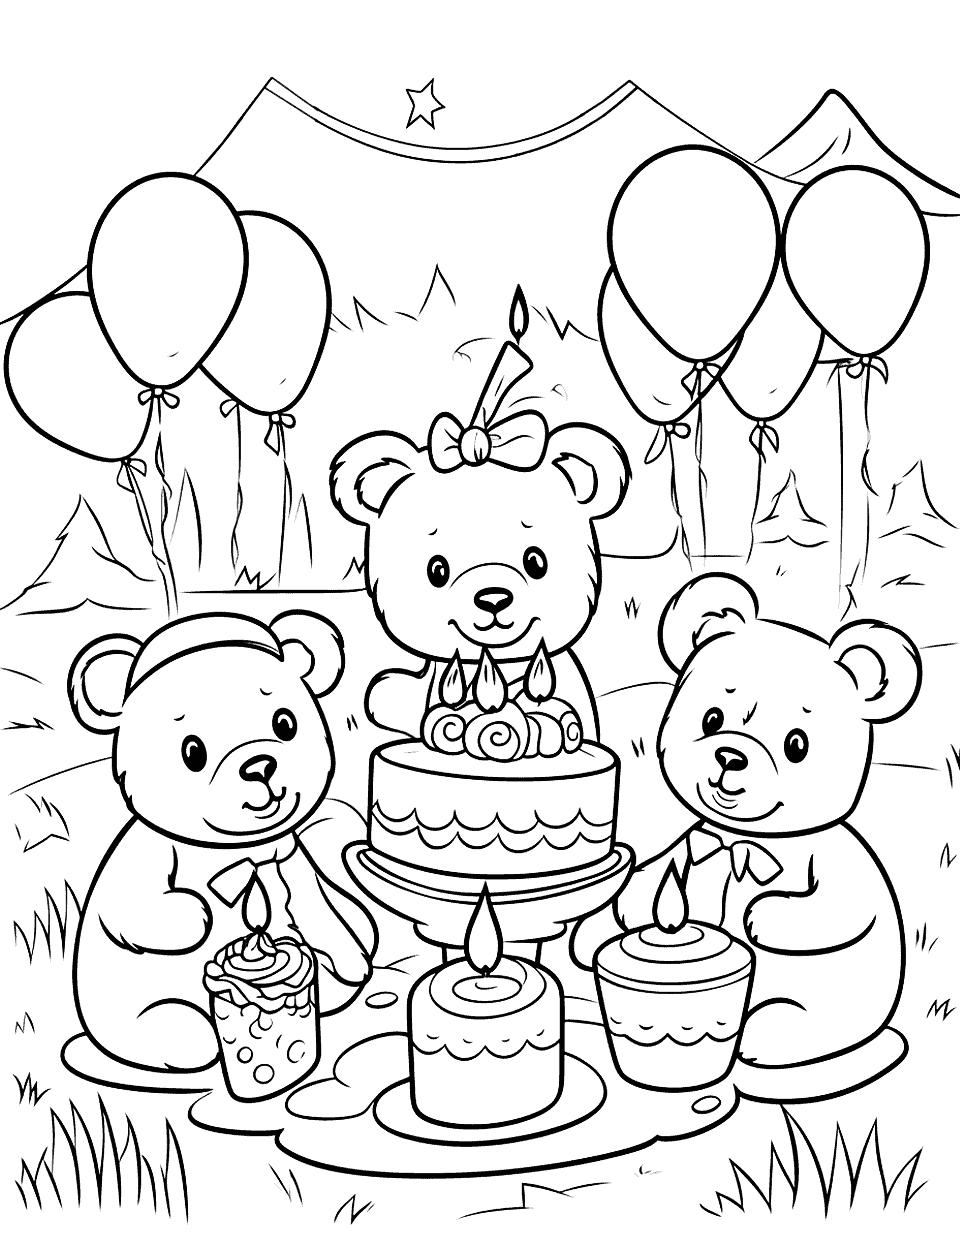 Teddy Bear's Picnic Birthday Happy Coloring Page - A group of teddy bears having a birthday picnic in the woods.